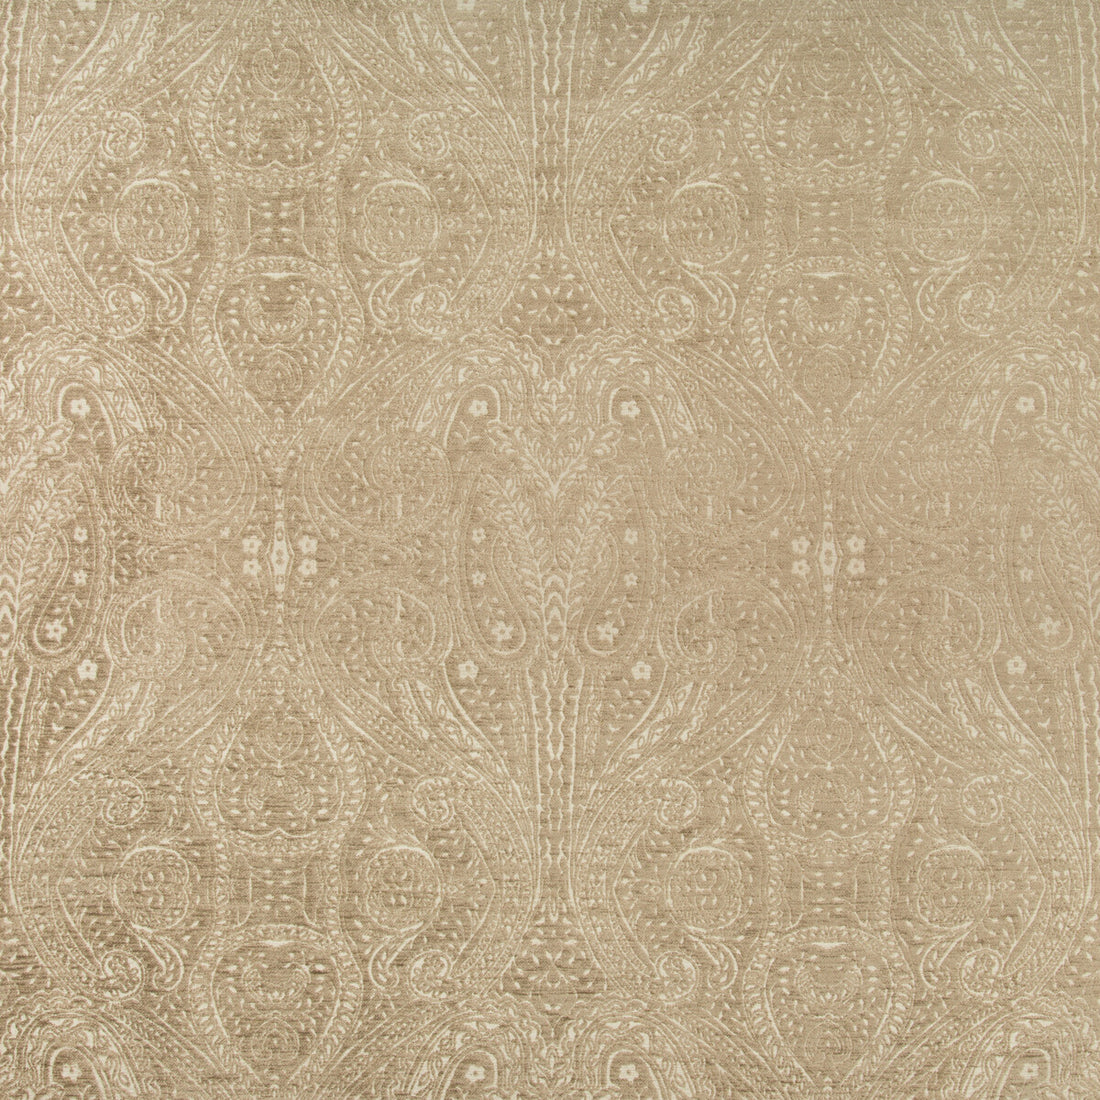 Kravet Contract fabric in 35015-1616 color - pattern 35015.1616.0 - by Kravet Contract in the Incase Crypton Gis collection